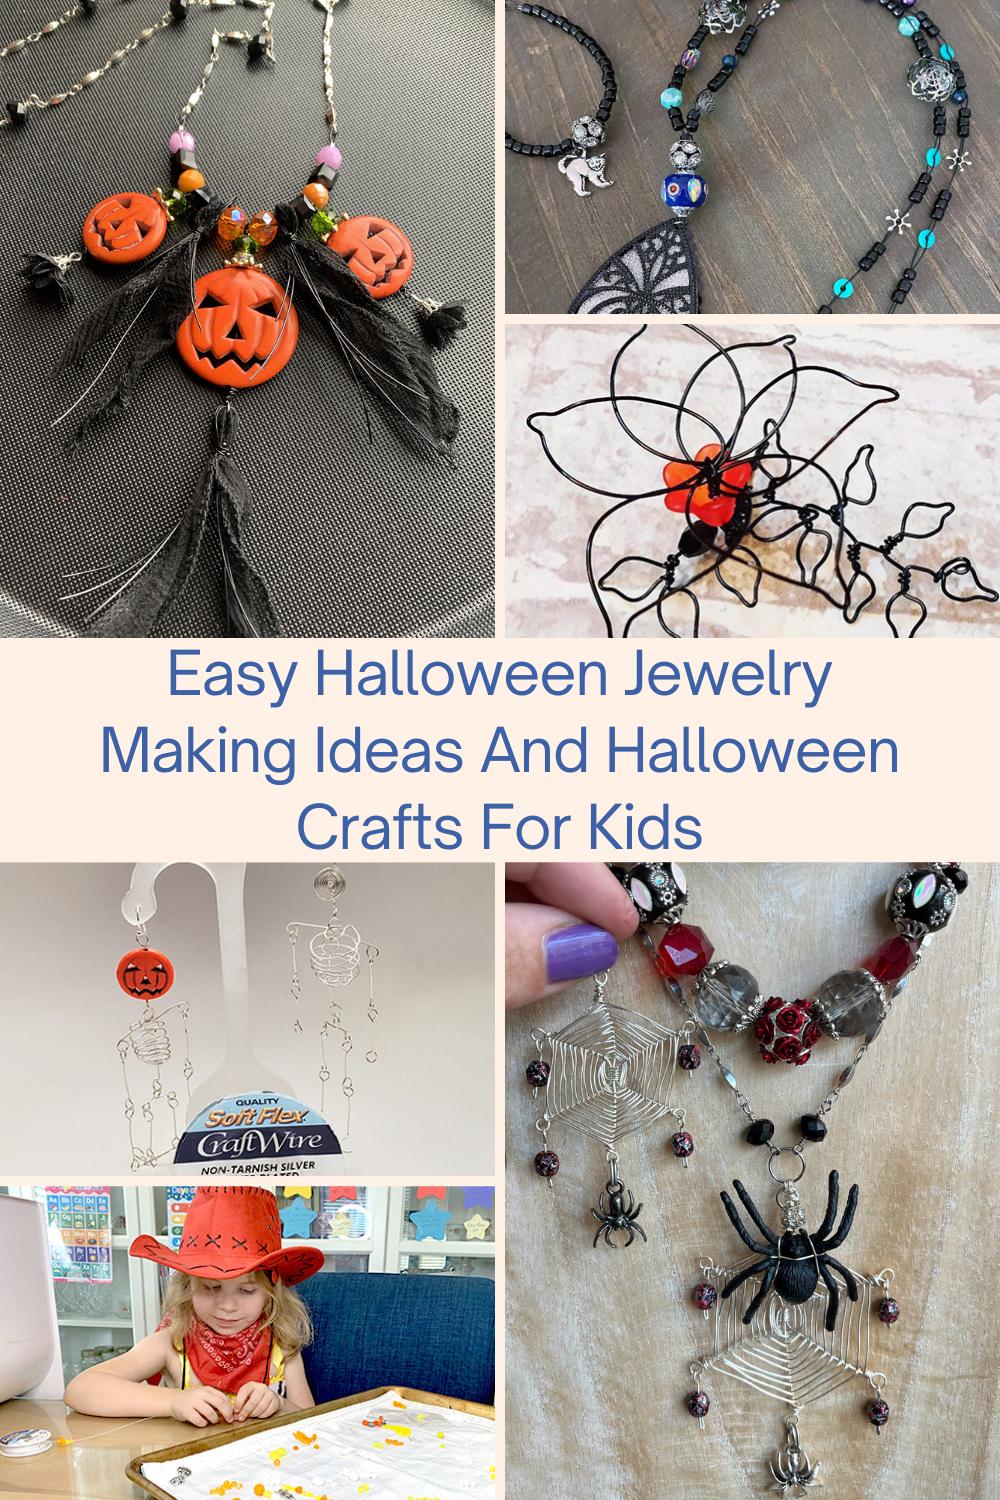 Easy Halloween Jewelry Making Ideas And Halloween Crafts For Kids Collage